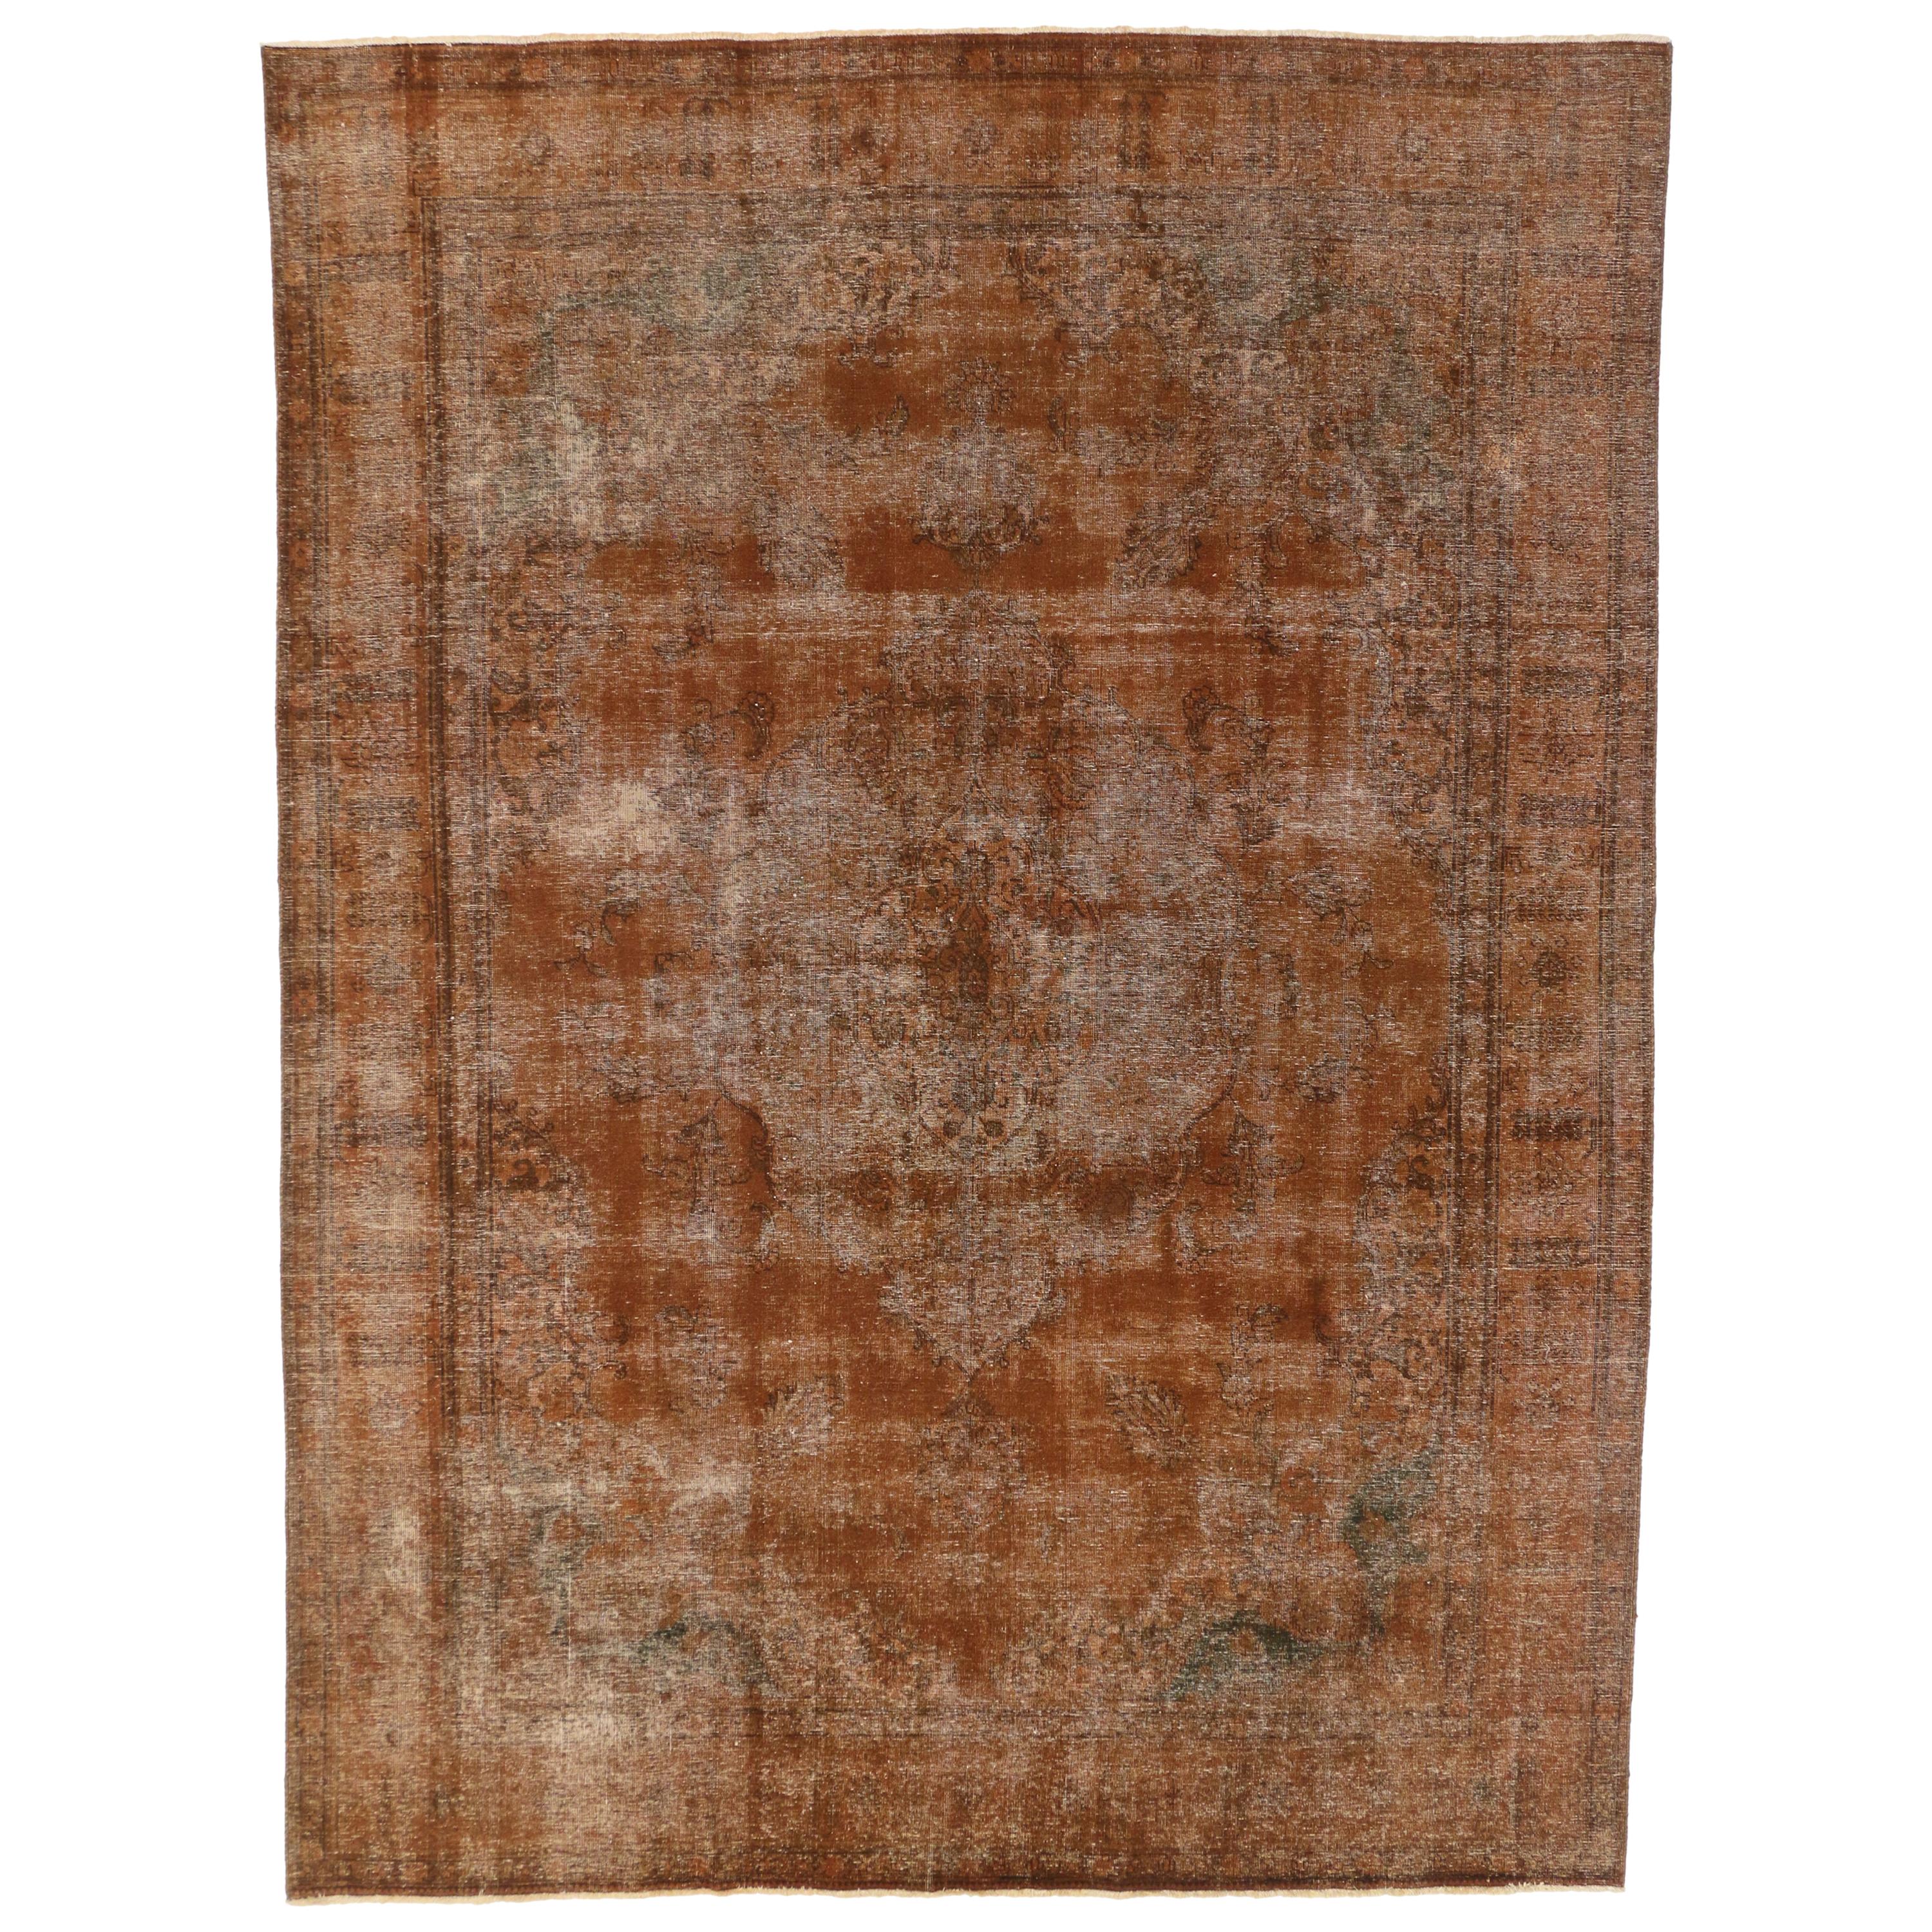 Autumn Maple Distressed Vintage Turkish Rug with Rustic Industrial Luxe Style